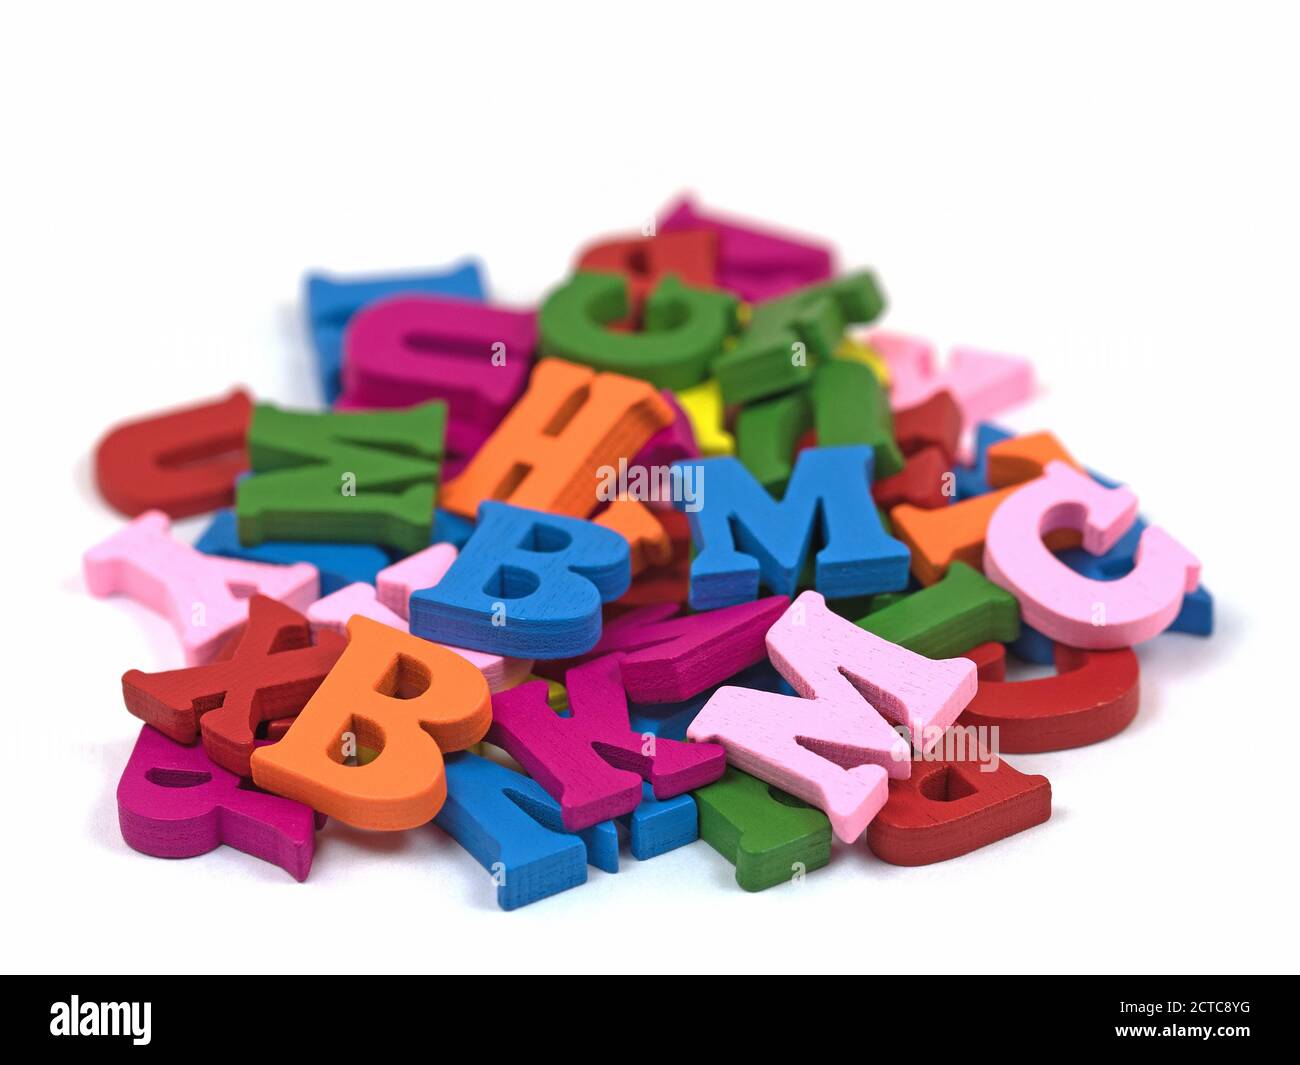 Colorful wooden letters against white background Stock Photo